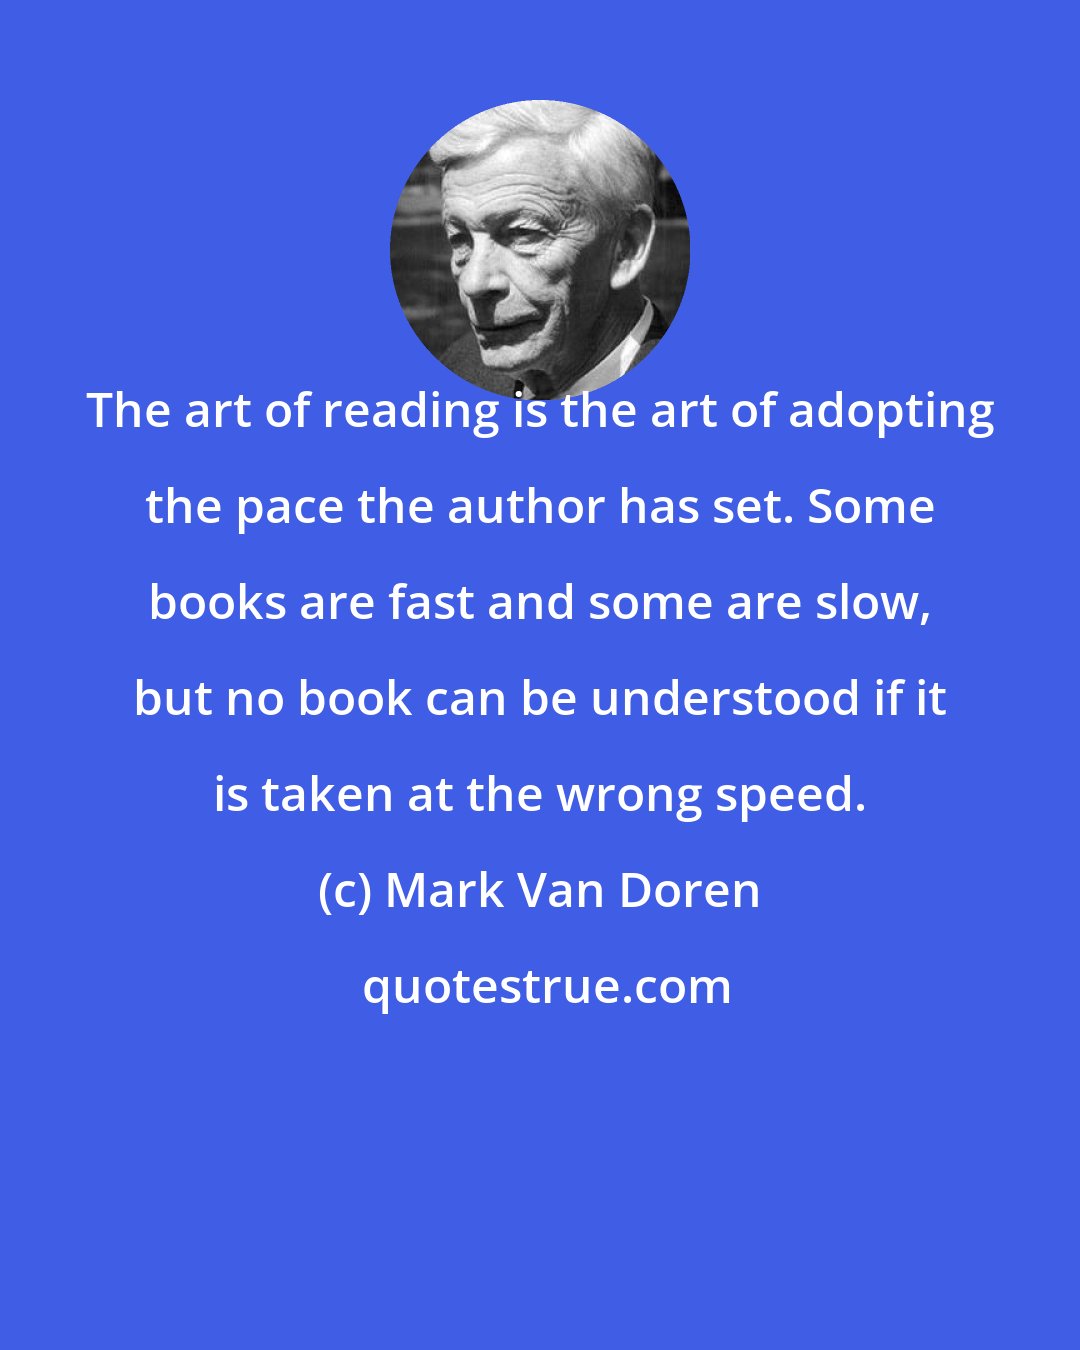 Mark Van Doren: The art of reading is the art of adopting the pace the author has set. Some books are fast and some are slow, but no book can be understood if it is taken at the wrong speed.